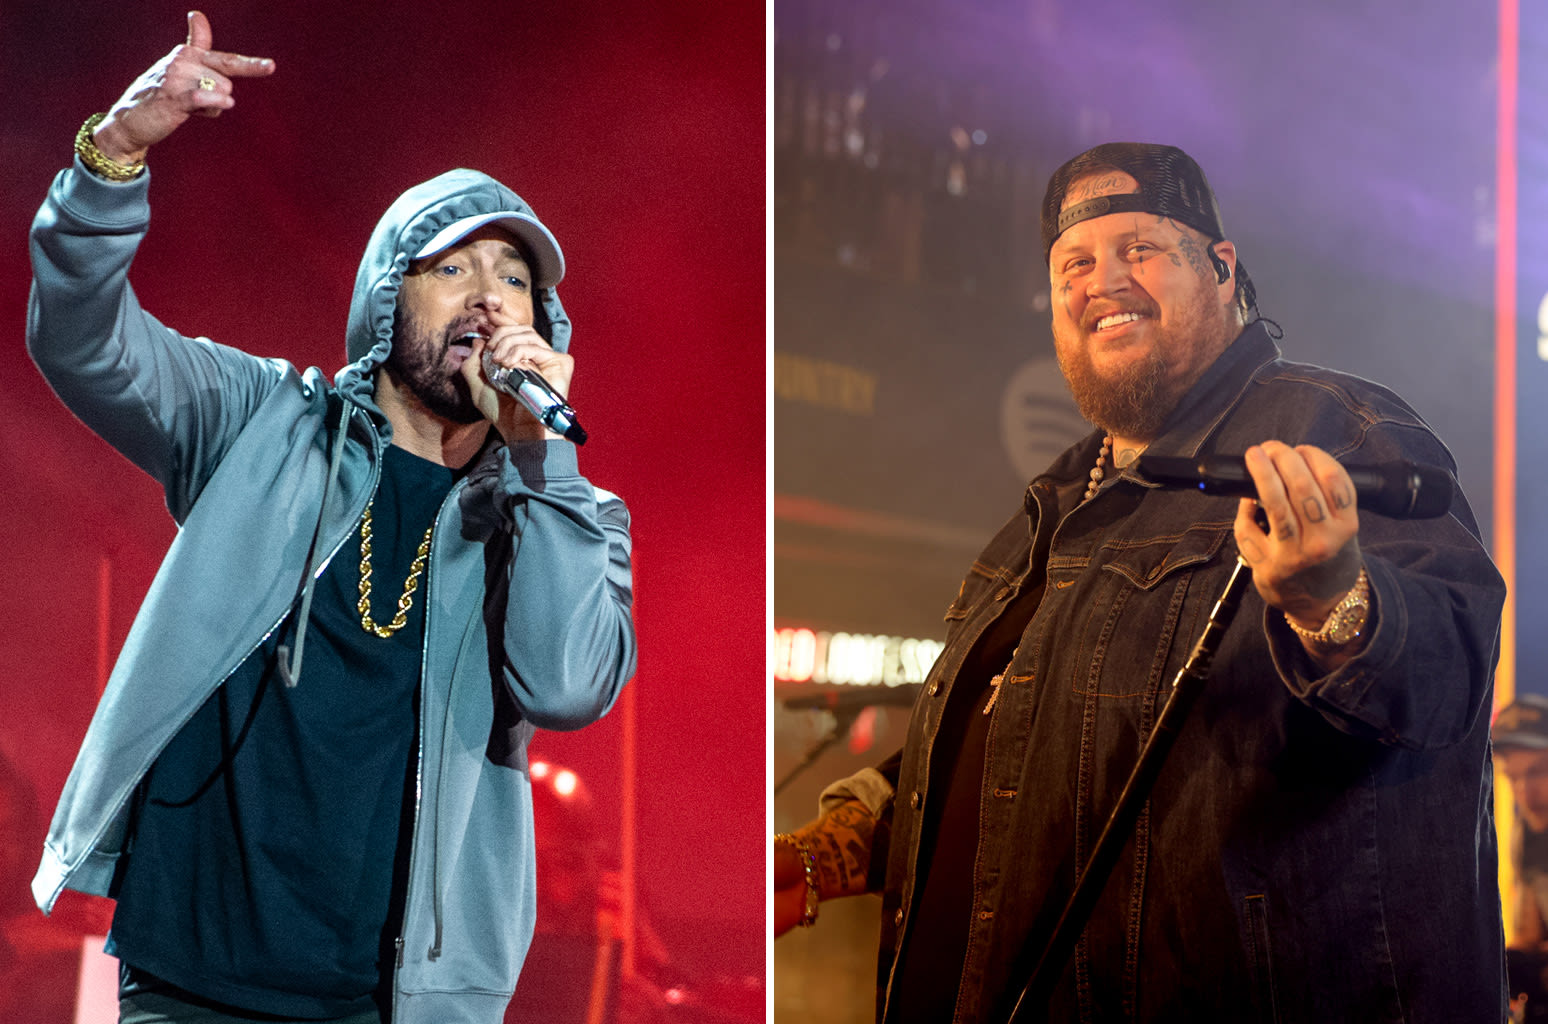 Eminem Apologizes to His Kids in Emotional New Song ‘Somebody Save Me’ Featuring Jelly Roll